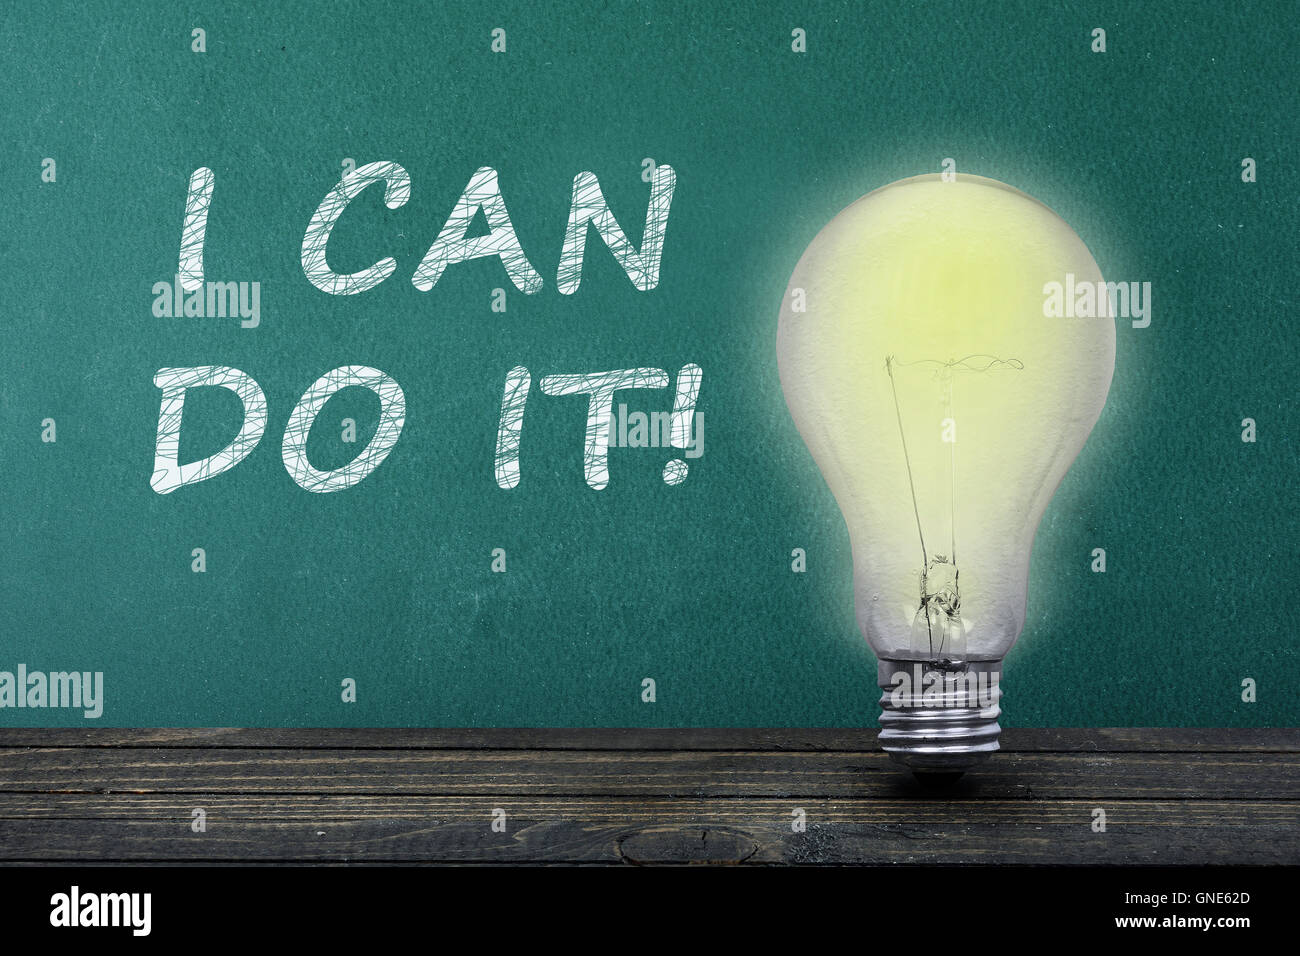 I can do it text on green board and light bulb on table Stock Photo